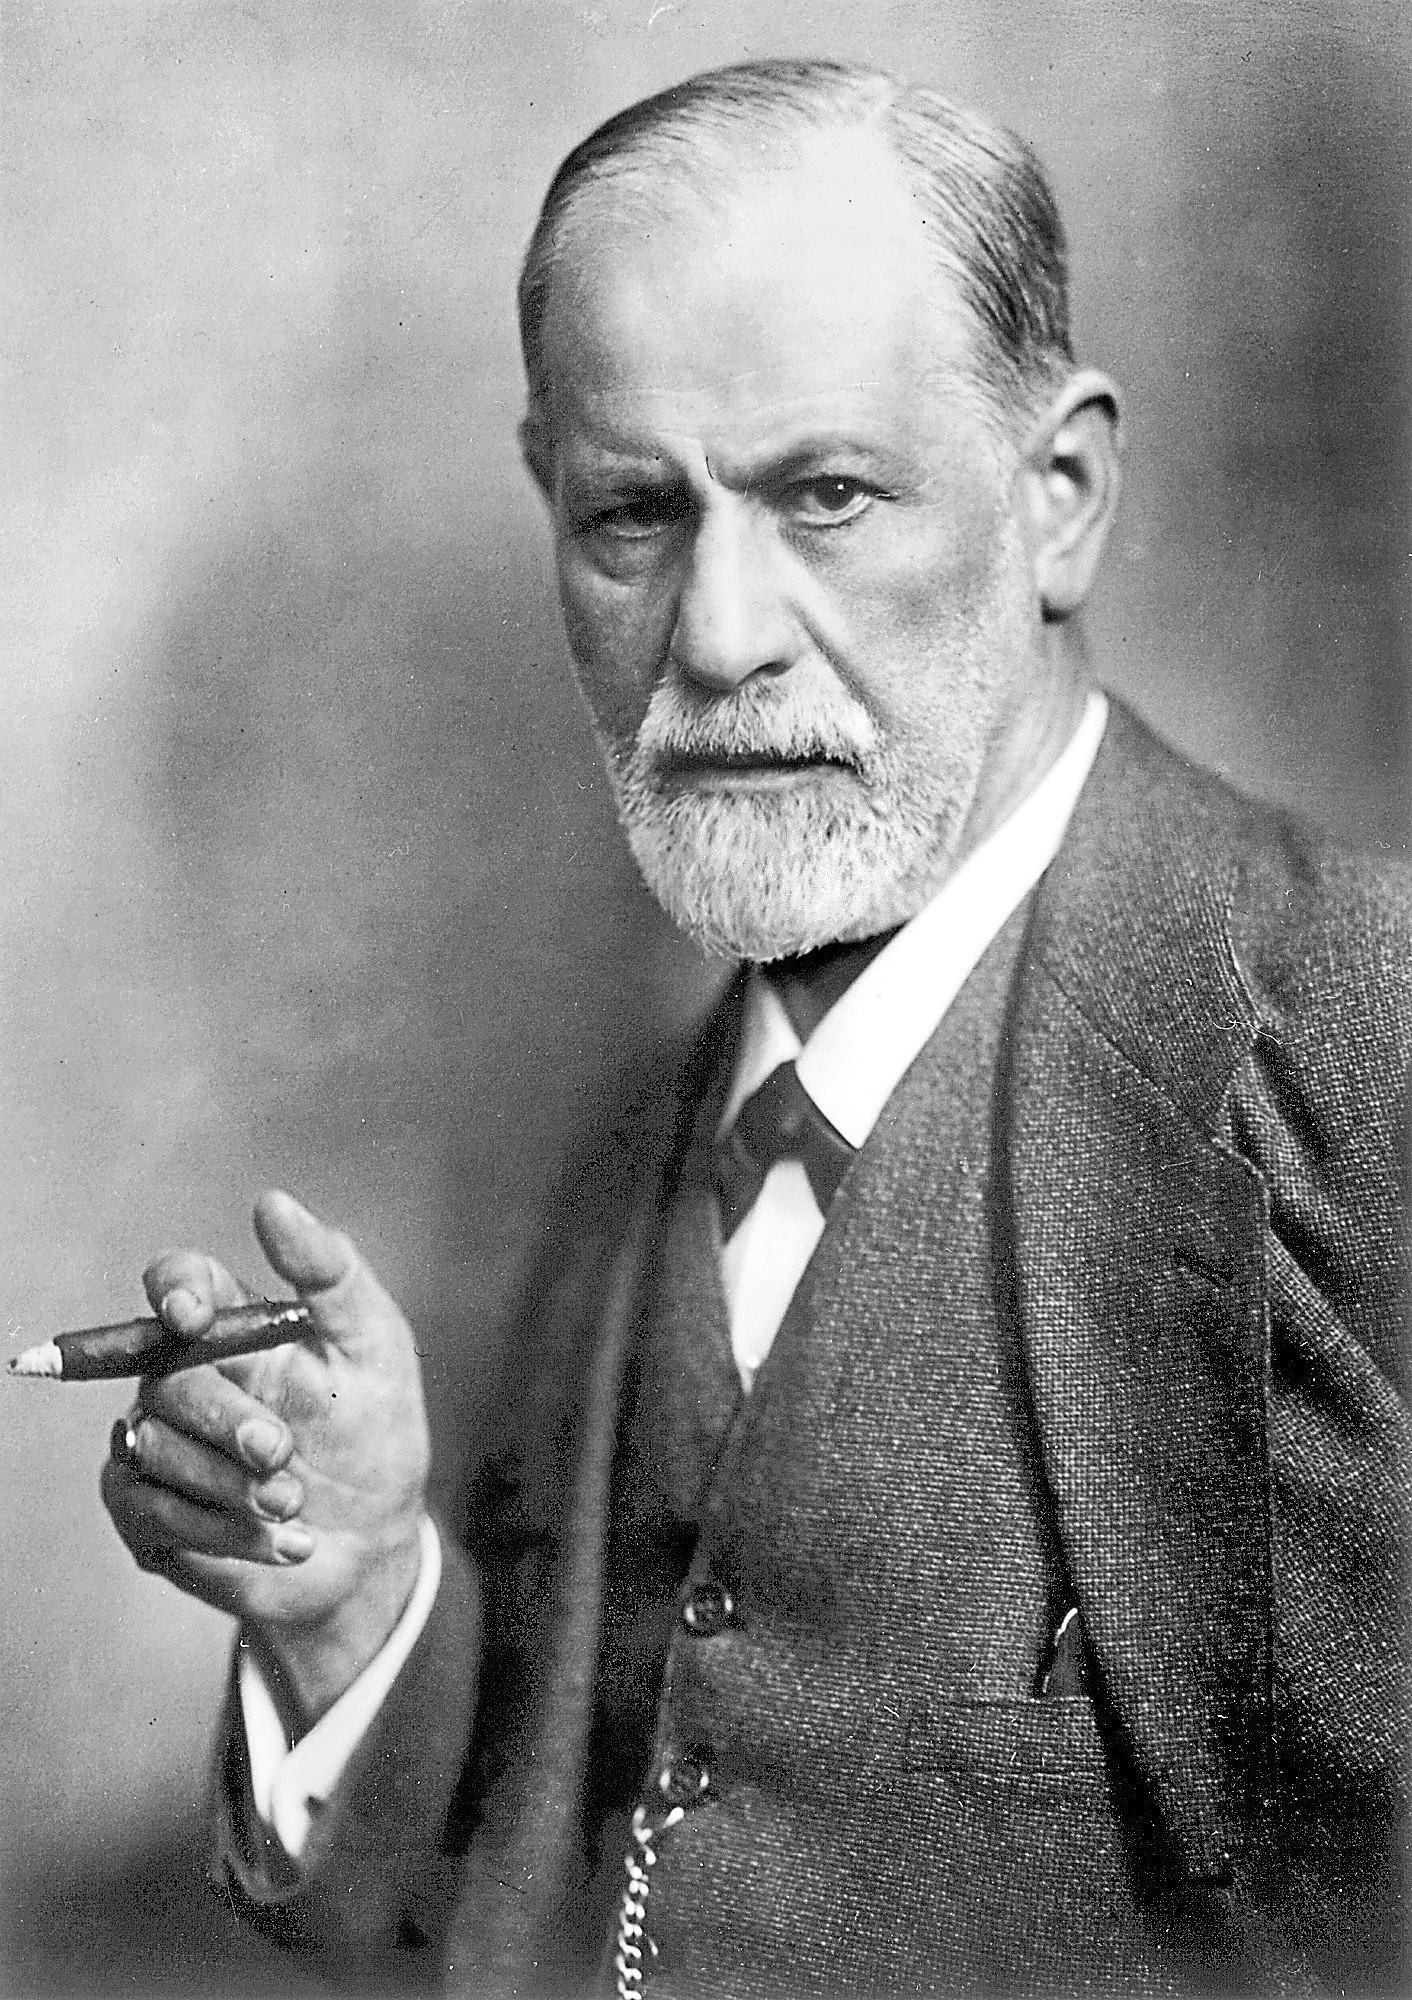 15 Most Influential People in History - Sigmund Freud